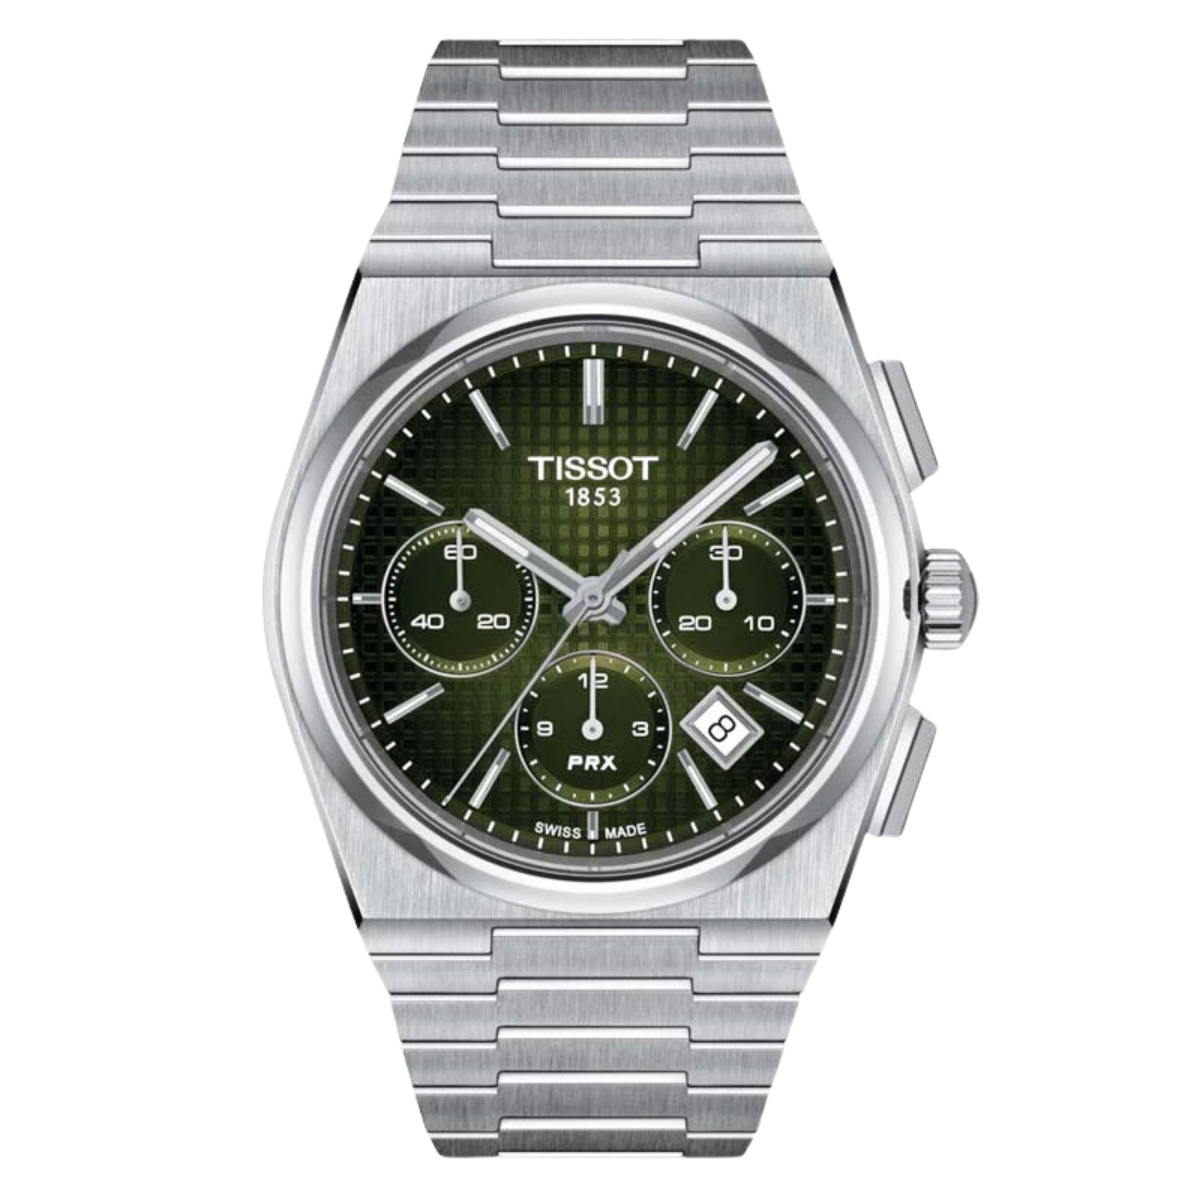 Tissot 1853 PRX Automatic Chronograph T1374271109100 T137.427.11.091.00 Green Dial Watch